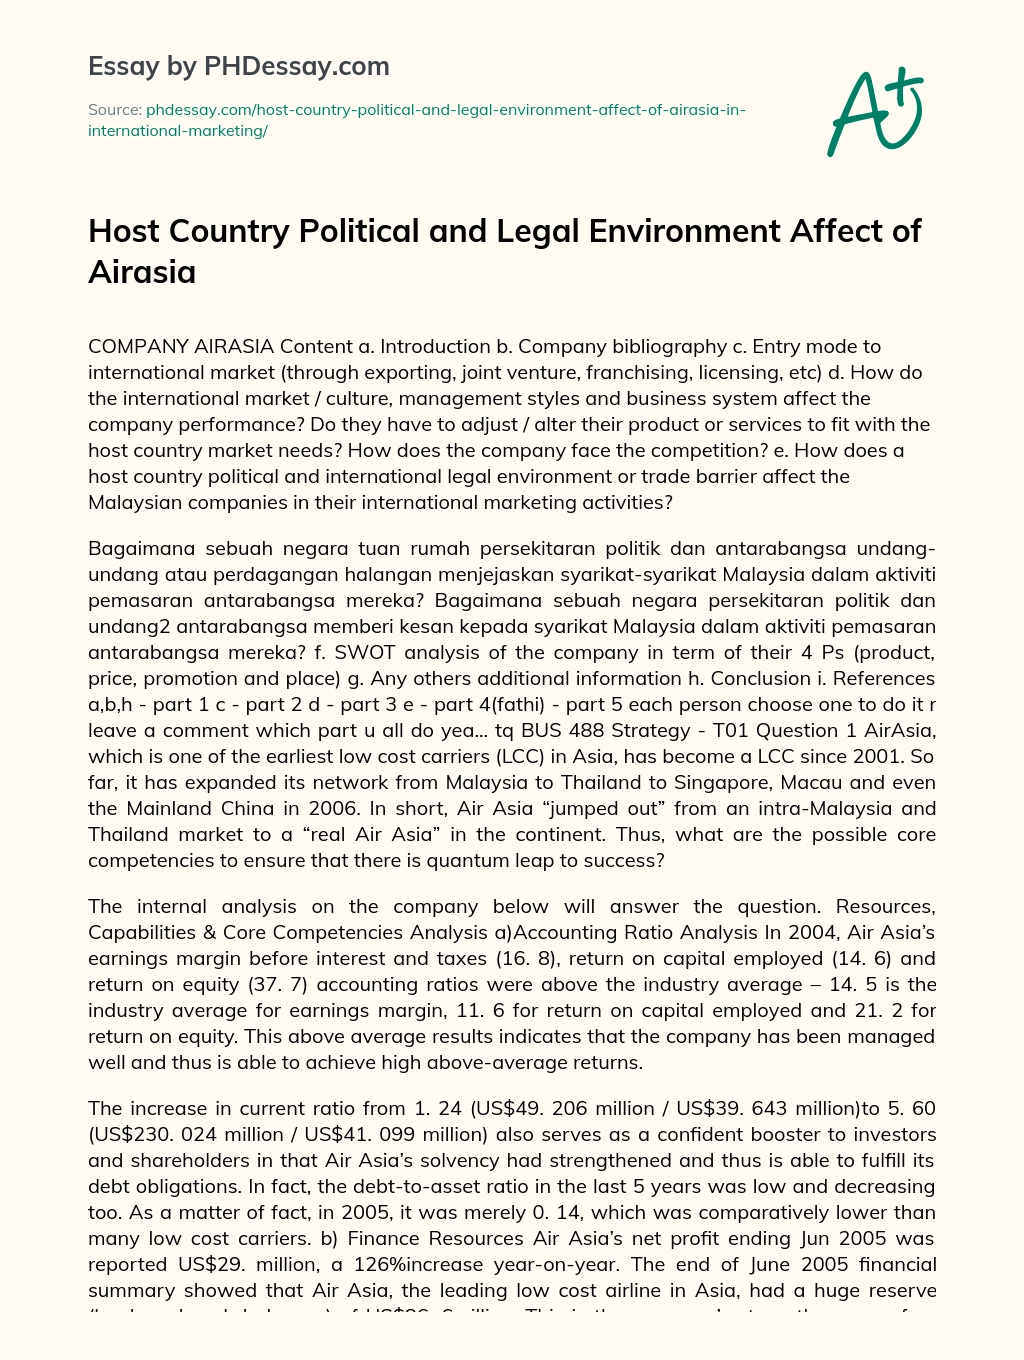 Host Country Political and Legal Environment Affect of Airasia essay